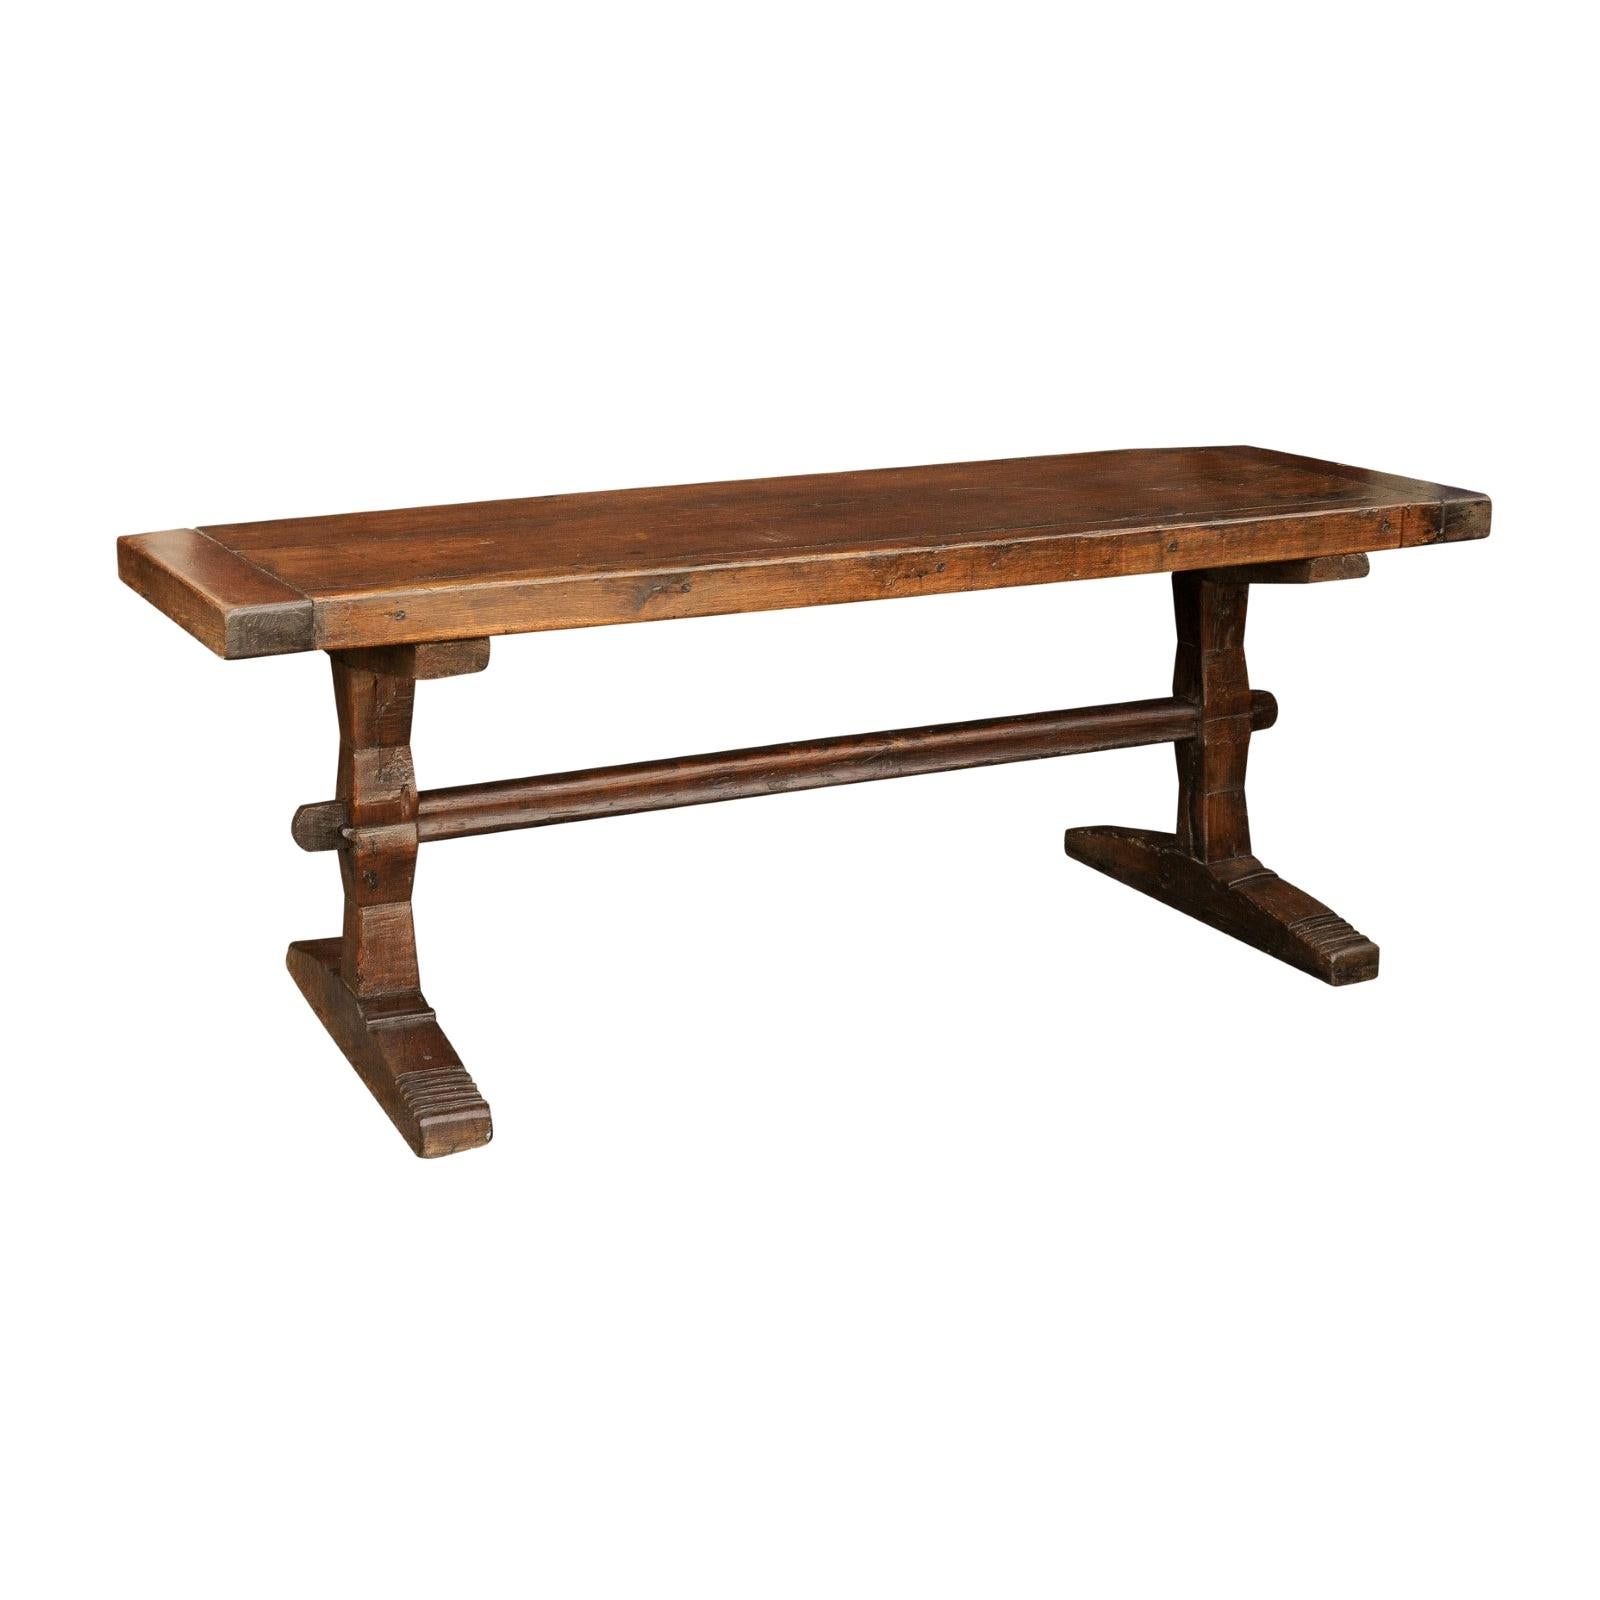 French Oak Farm Table with Trestle Base and Weathered Patina, circa 1880